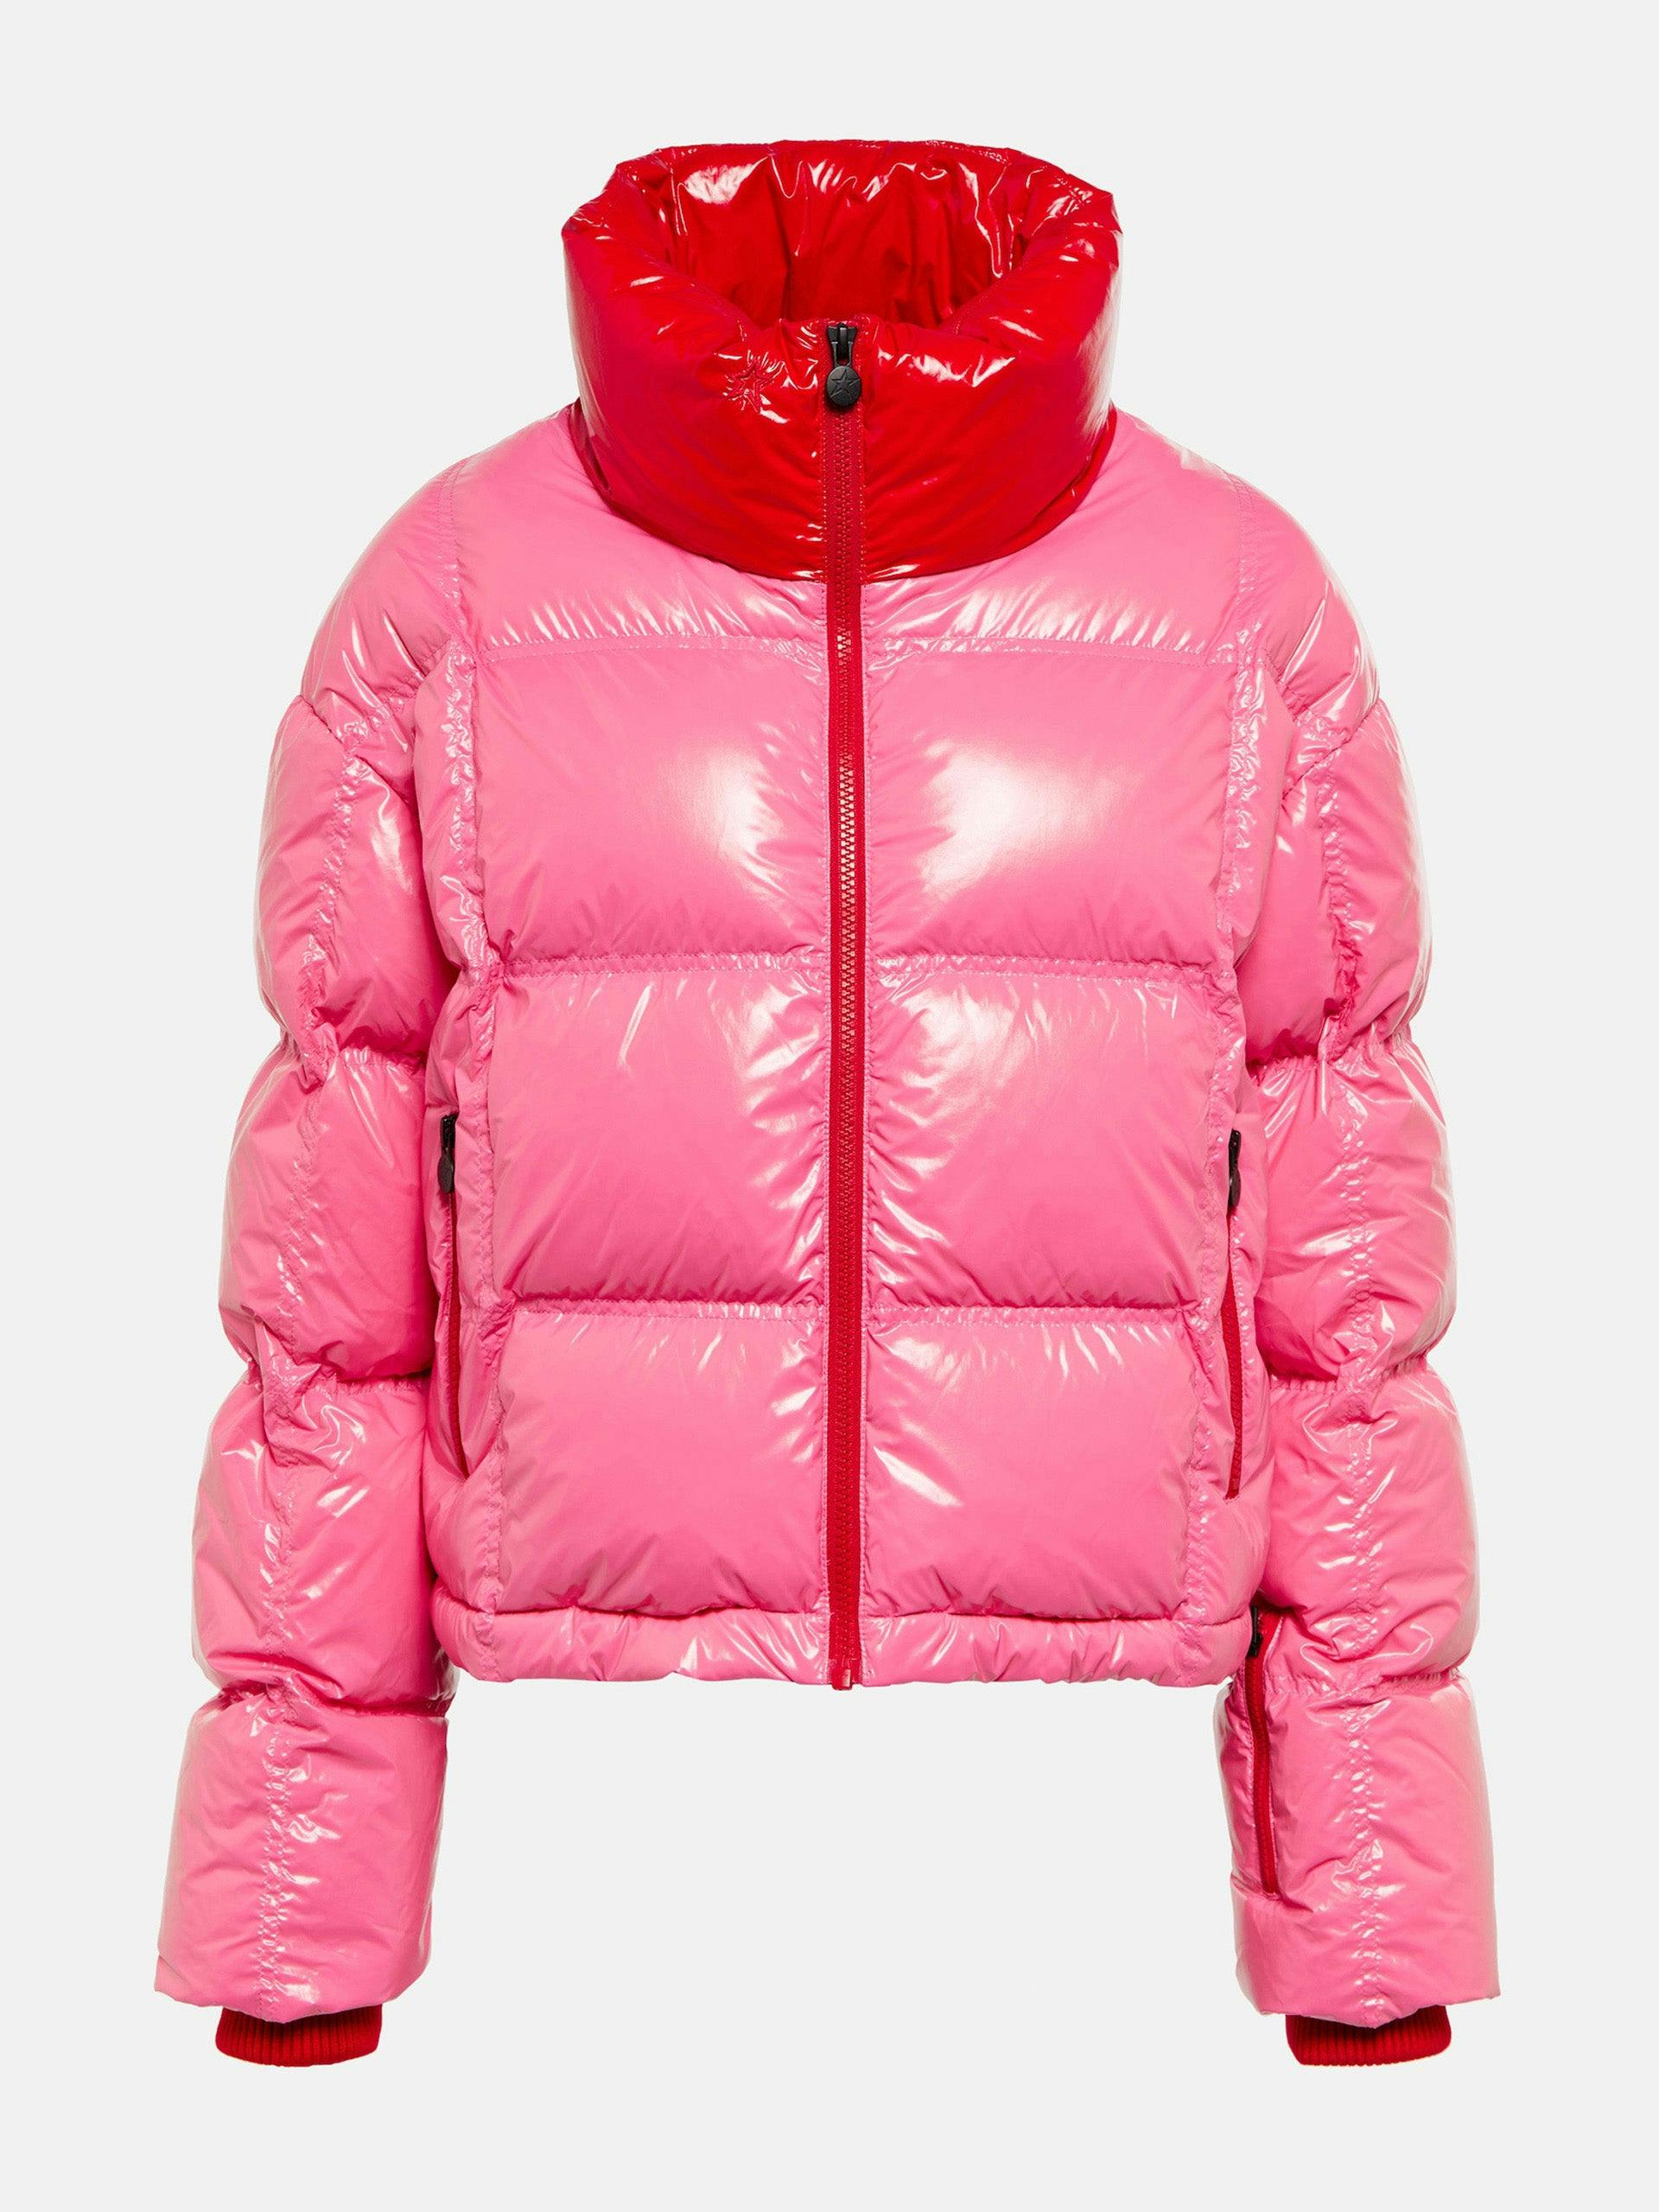 Red and pink lacquered quilted jacket